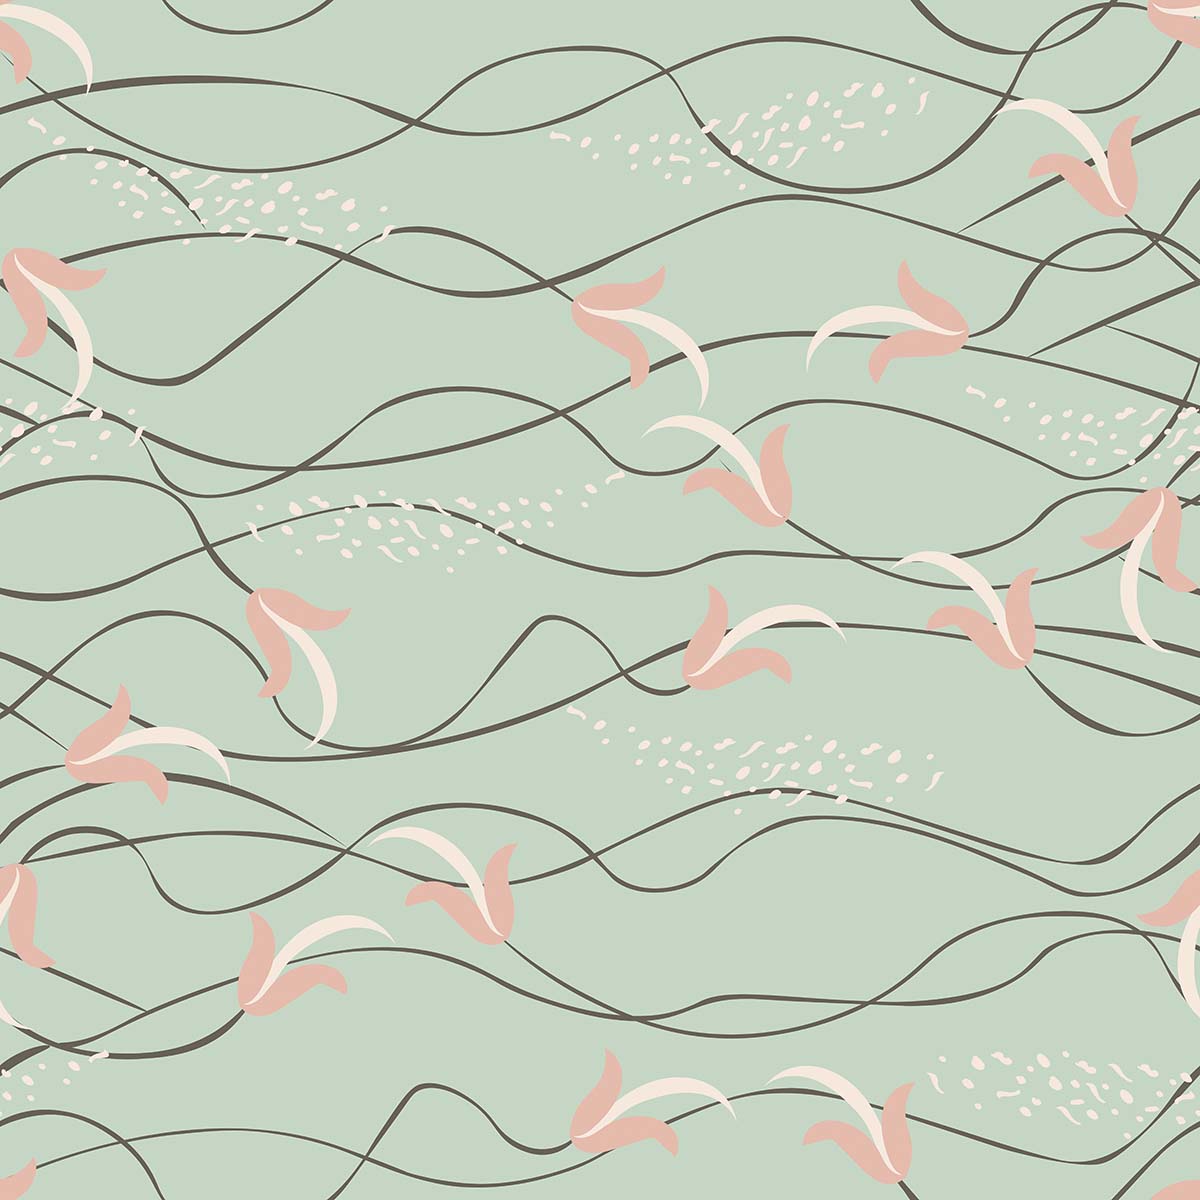 A pattern of pink flowers and black lines